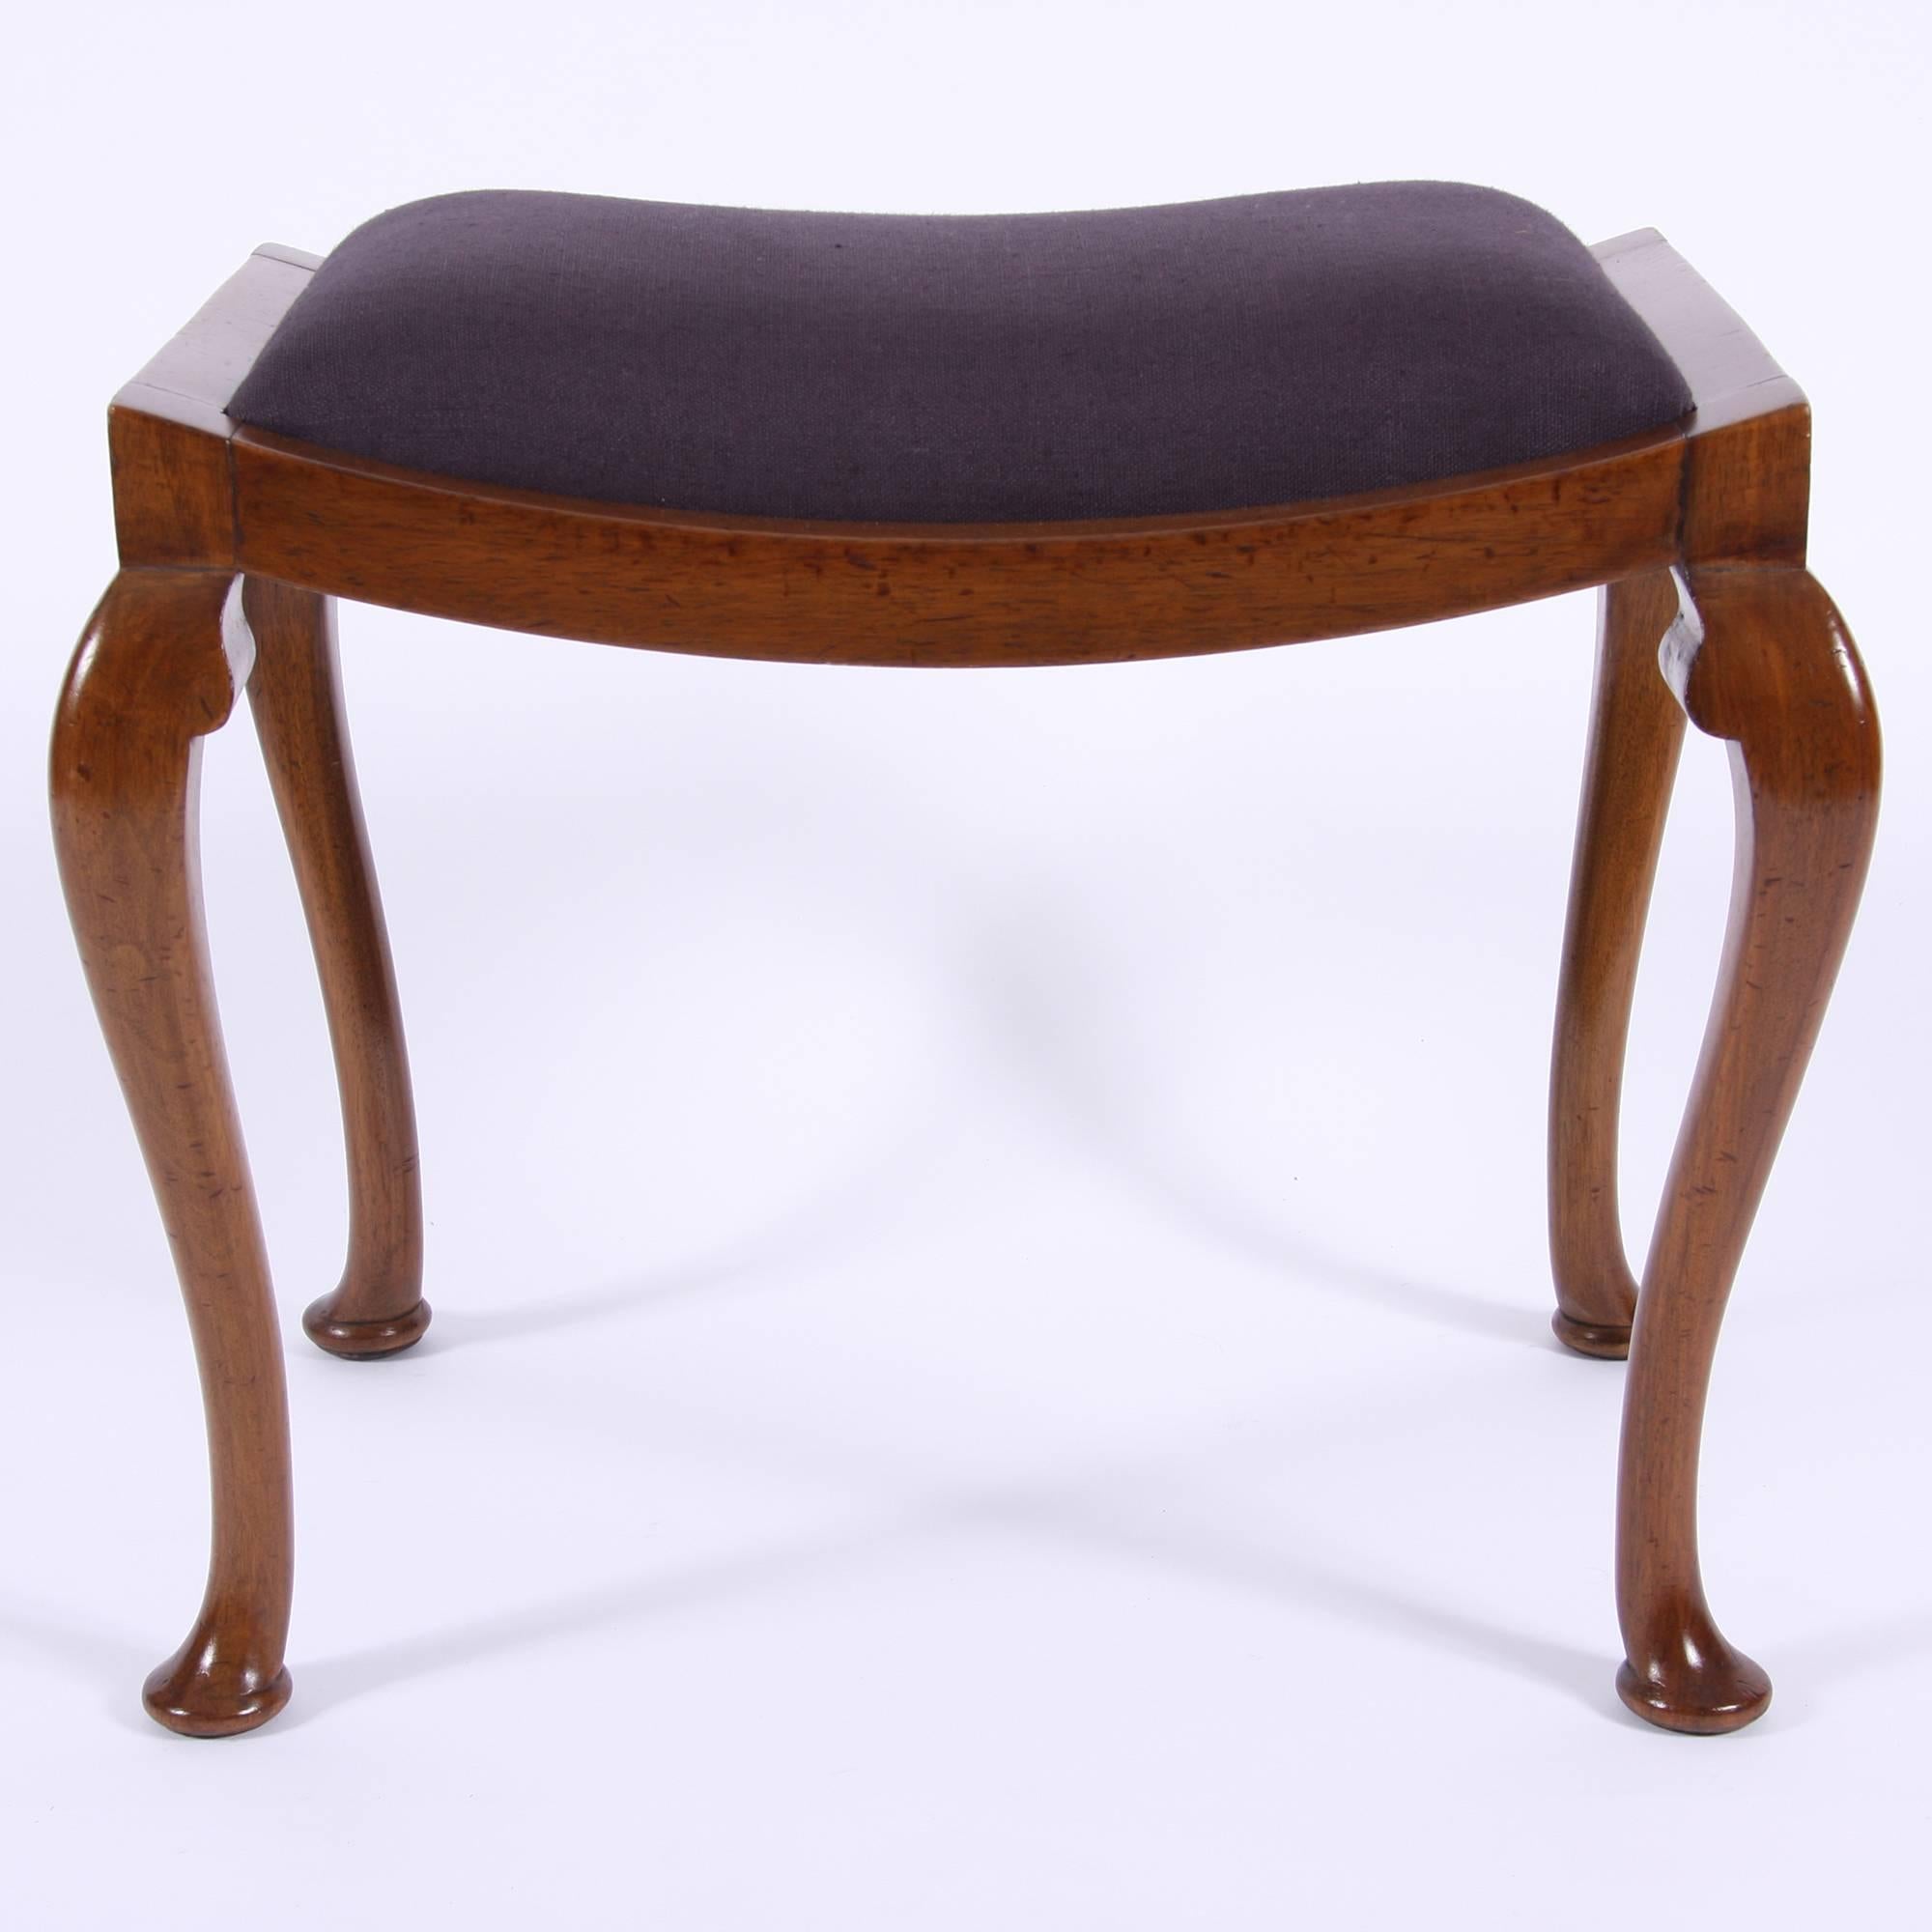 A very elegant early 20th century mahogany stool, perfect for use with a piano or dressing table. Newly upholstered seat pad.